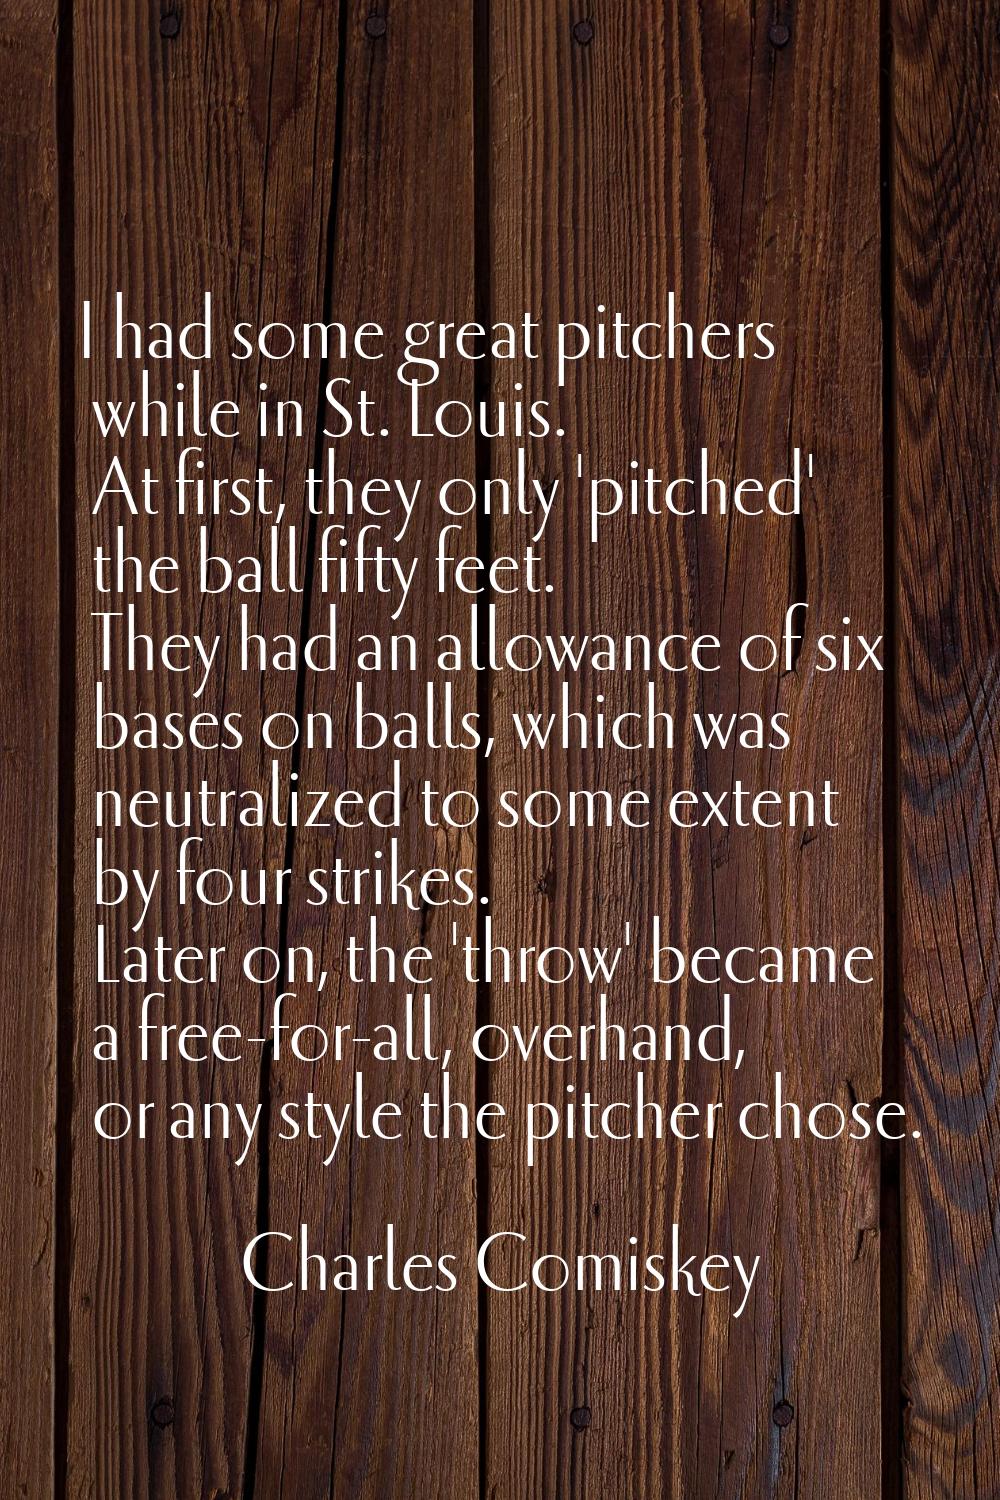 I had some great pitchers while in St. Louis. At first, they only 'pitched' the ball fifty feet. Th